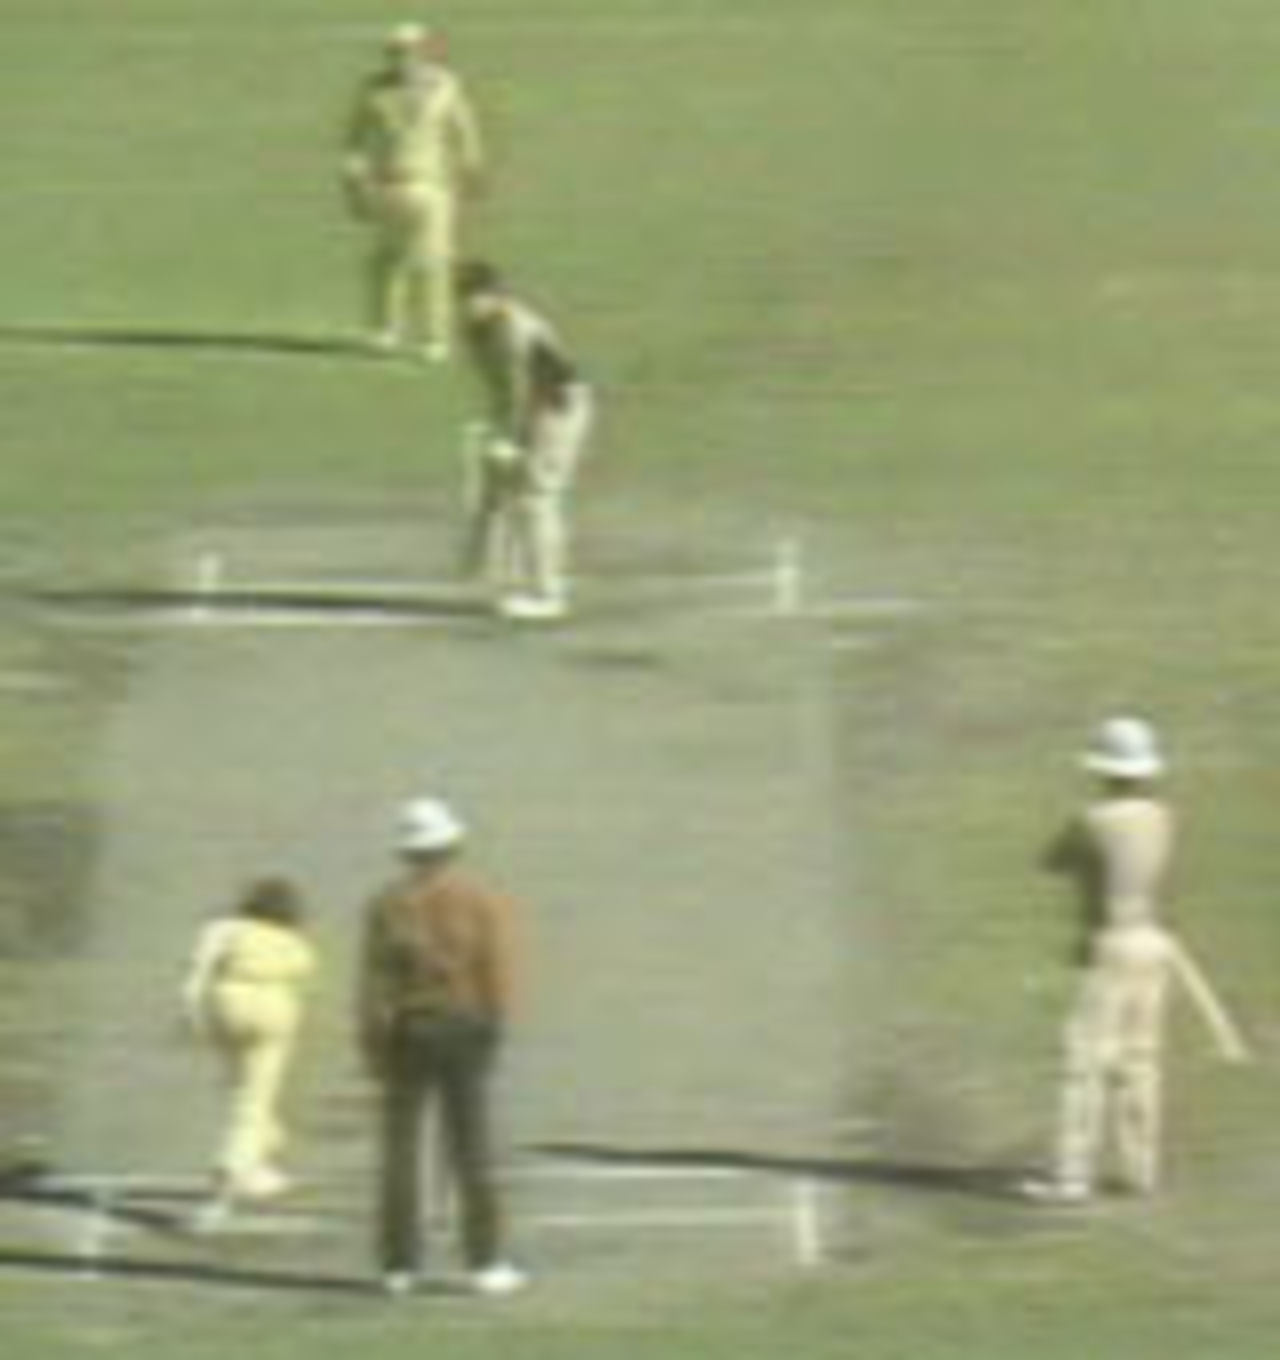 Trevor Chappell bowls his infamous underarm delivery to Brian McKechnie